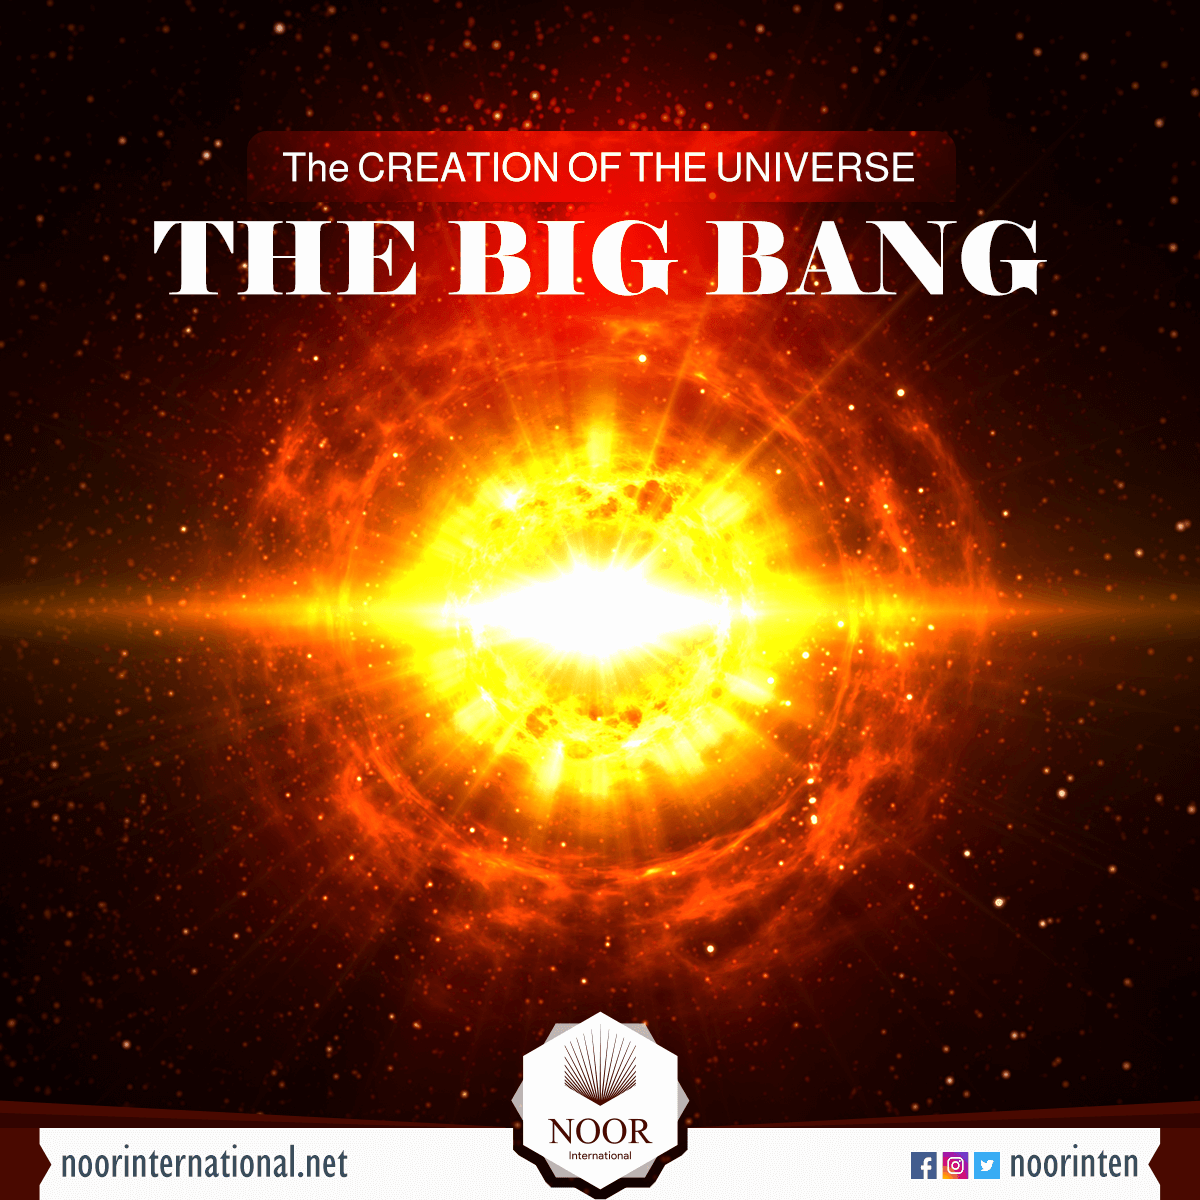 The CREATION OF THE UNIVERSE: ‘THE BIG BANG’